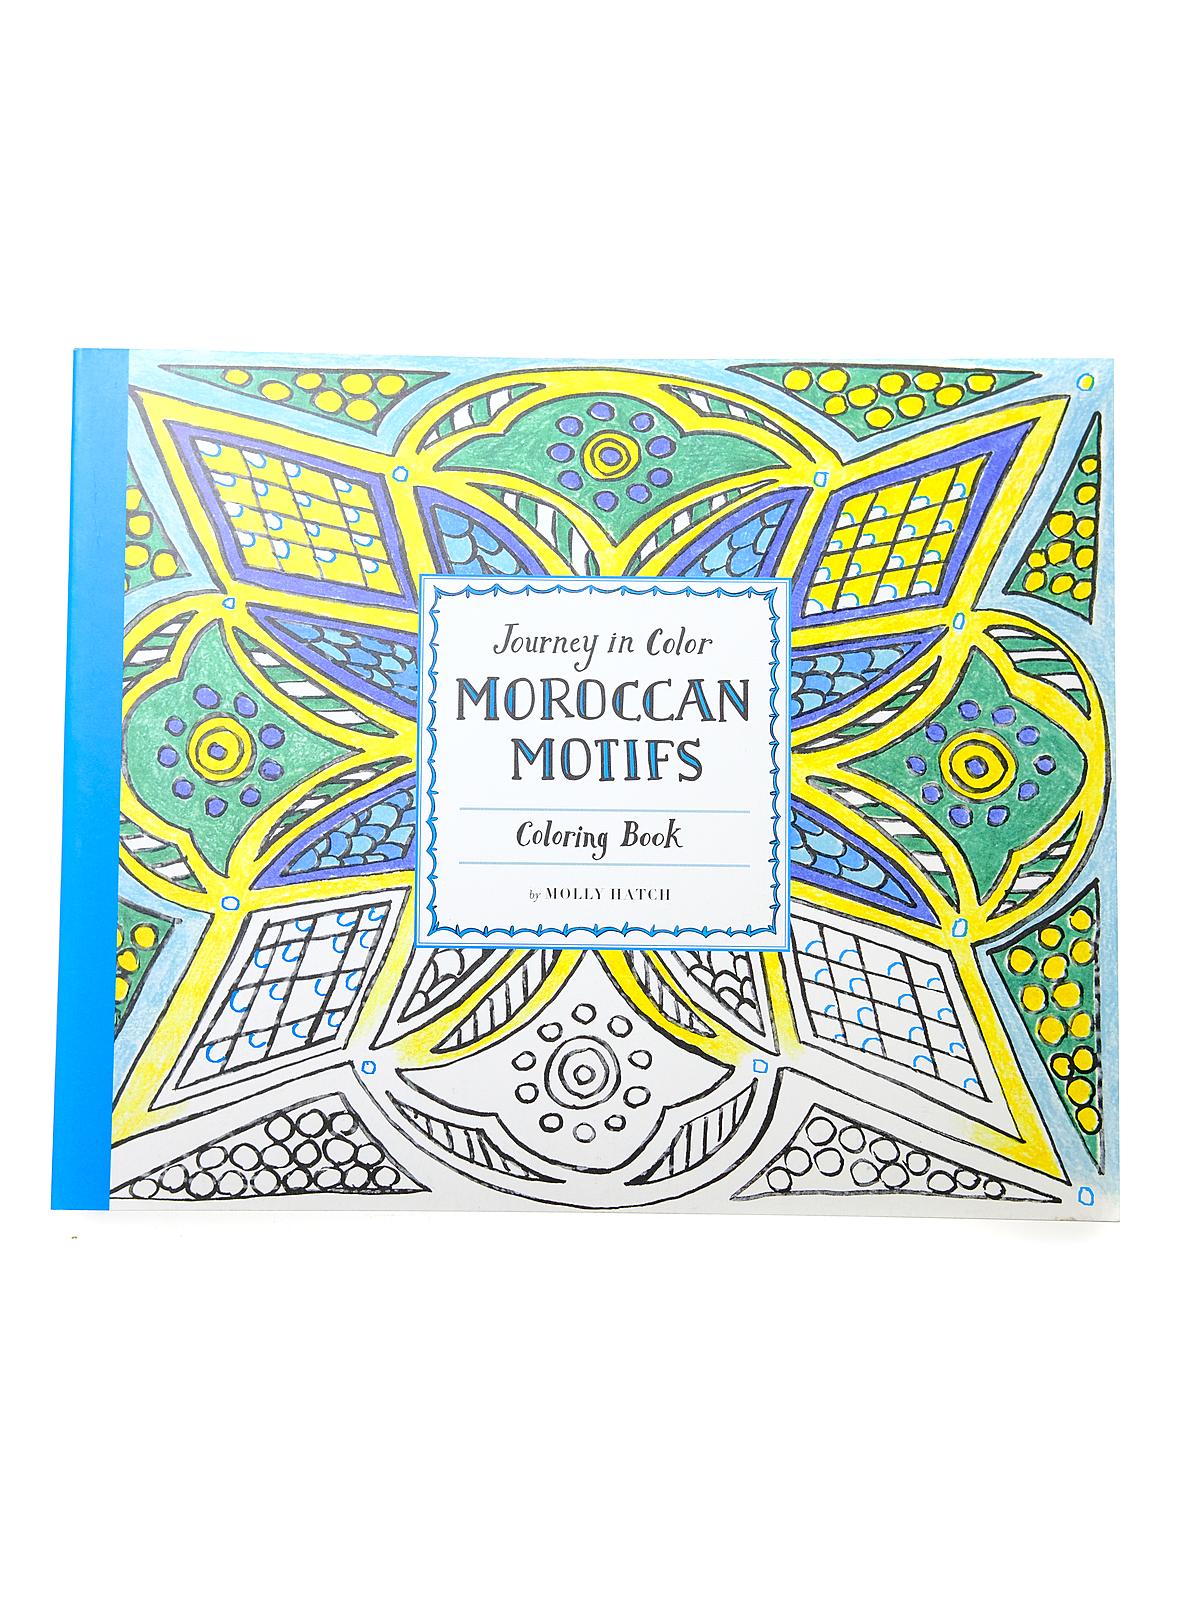 Journey In Color: Moroccan Motifs Coloring Book Each